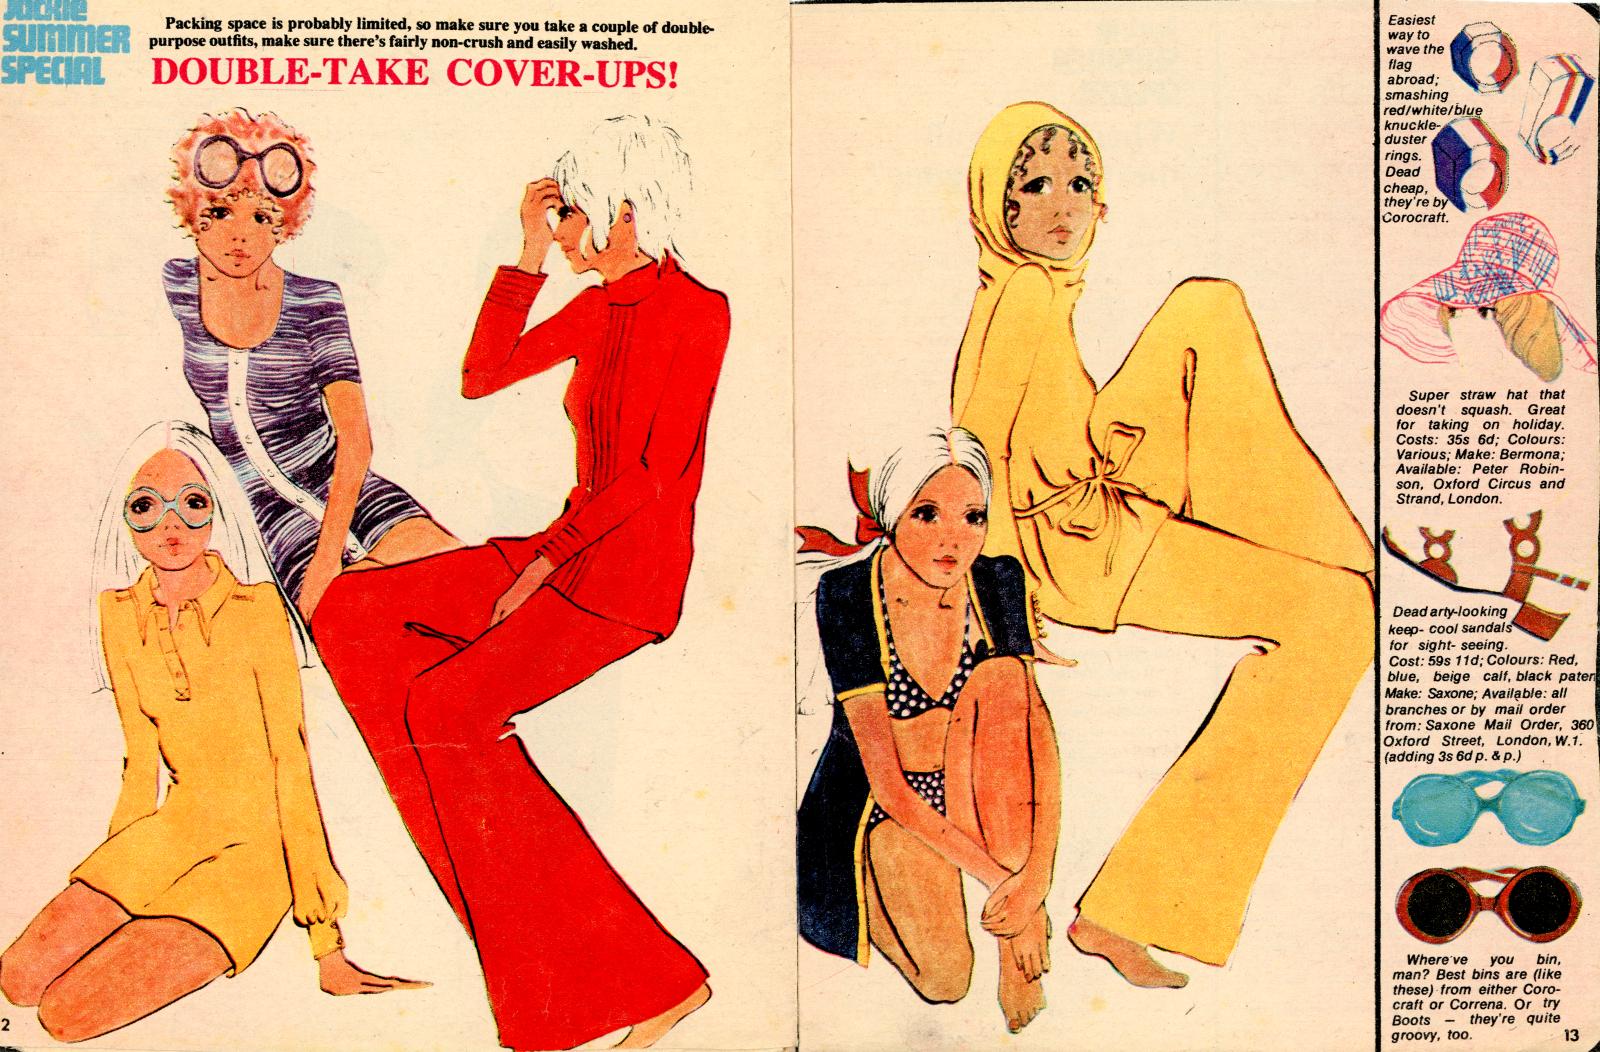 1970s fashion spread from Jackie Summer Special titled "Double-Take Cover Ups!"